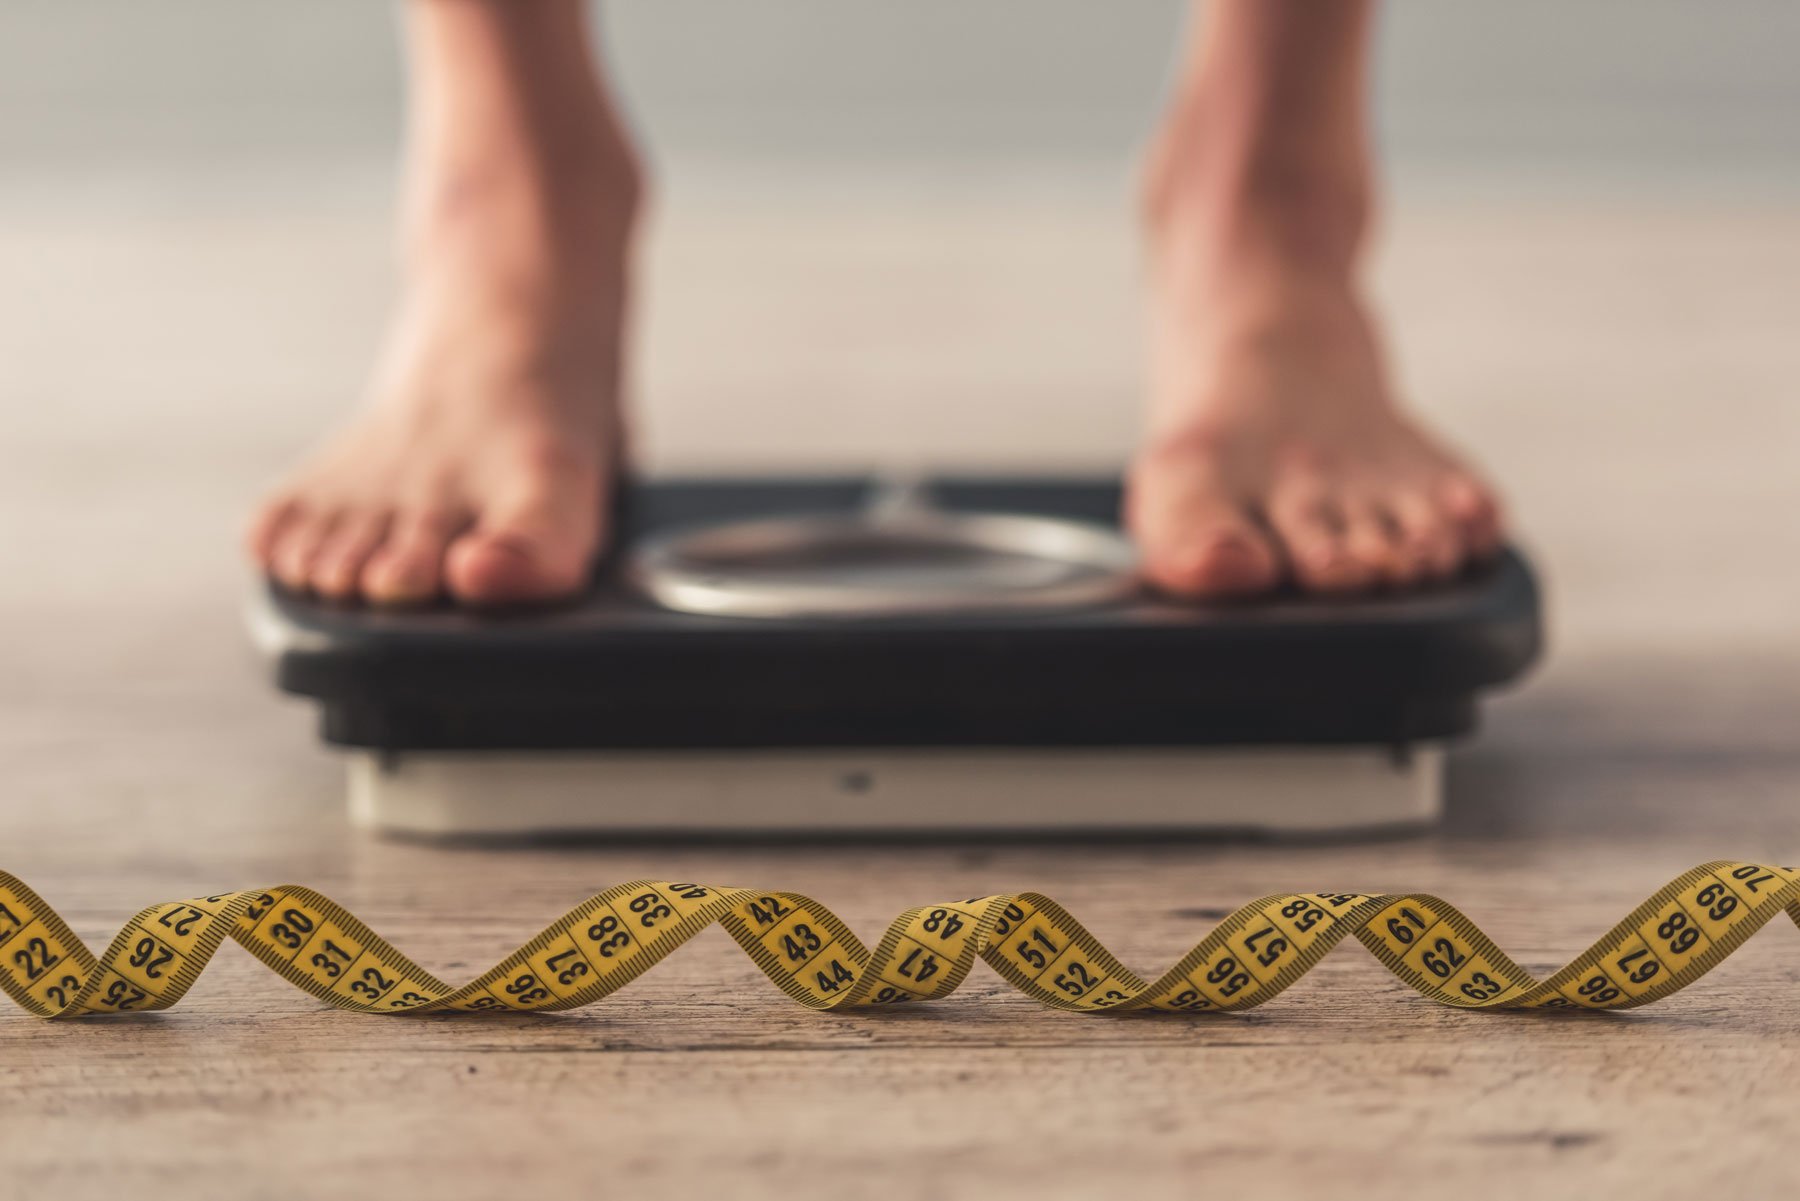 How does weight gain actually work in our bodies?